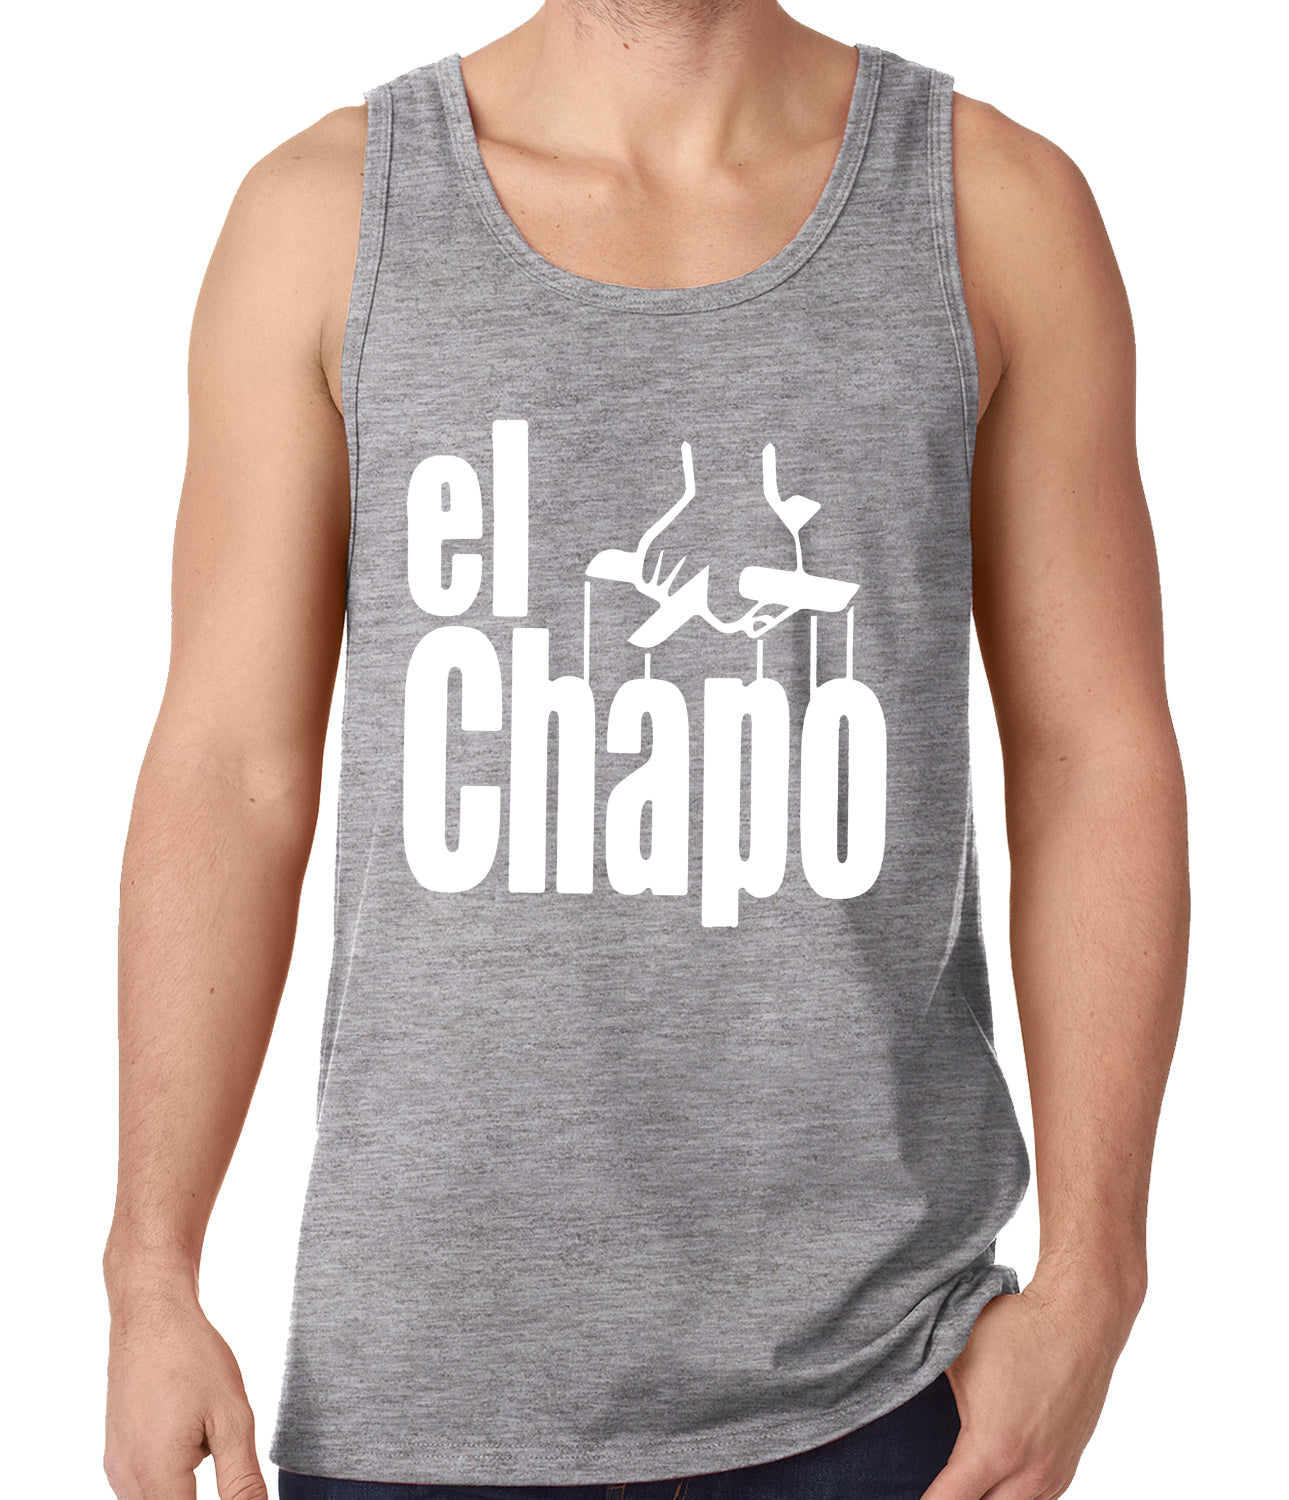 The God Father Inspired El Chapo Tank Top